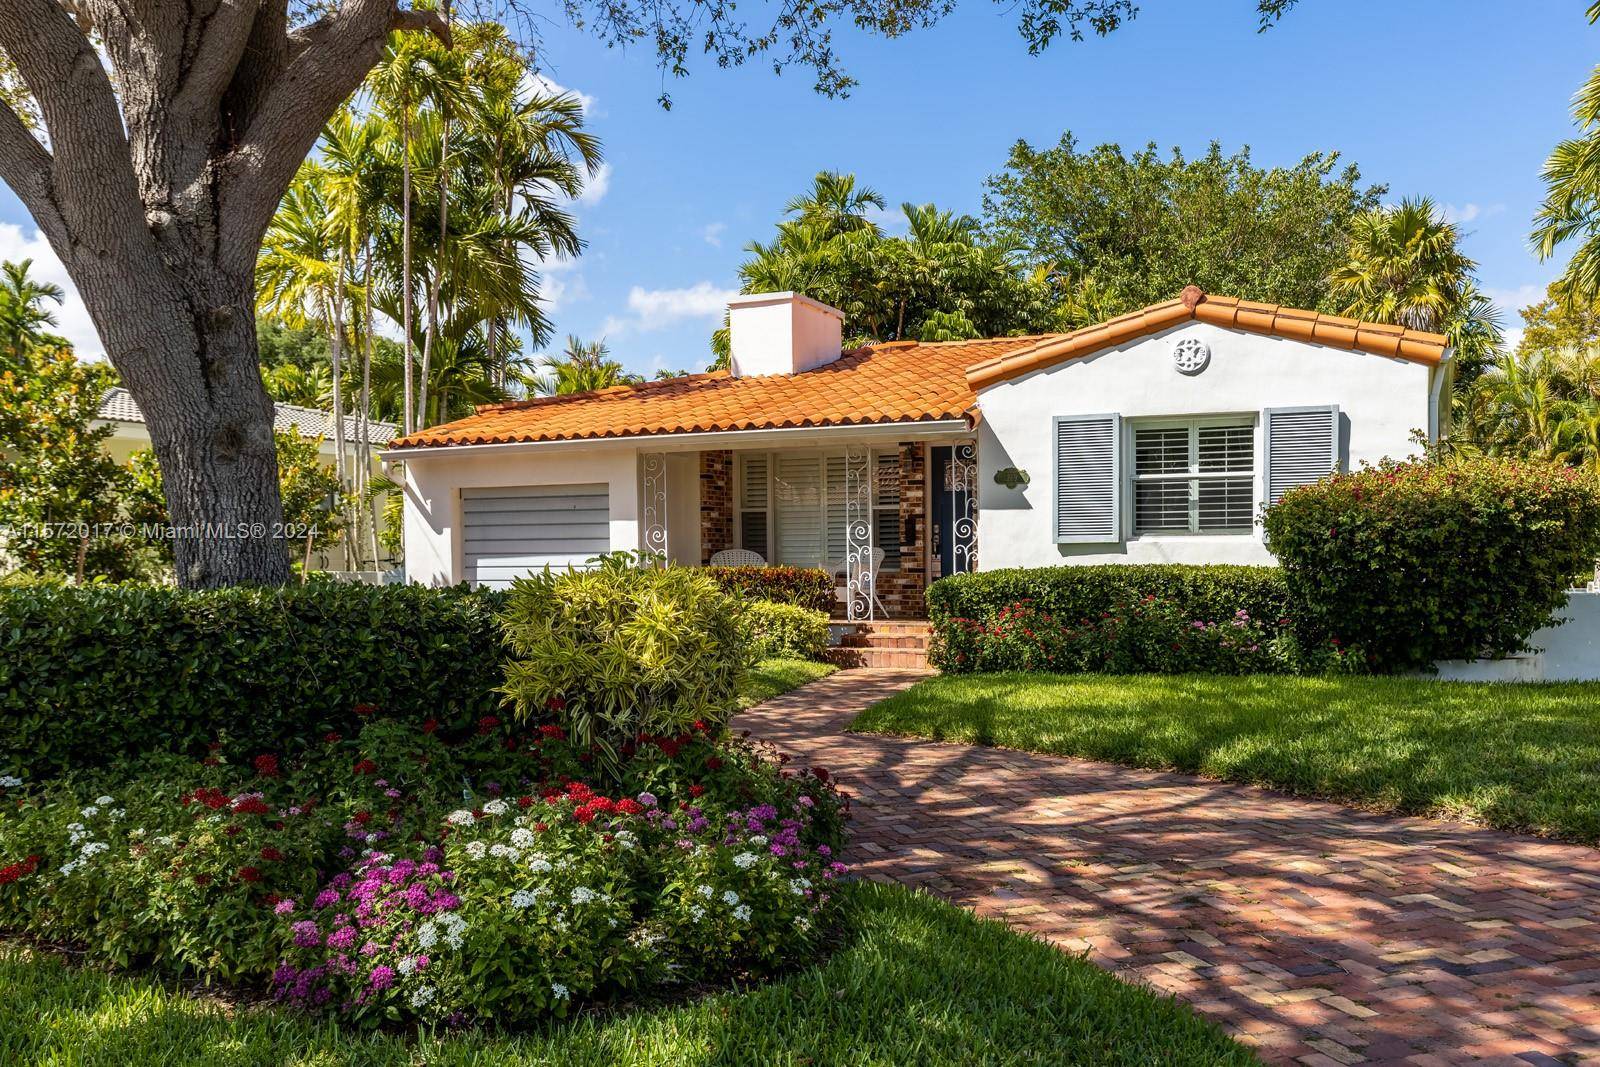 Charming home in a prime Miami Shores location surrounded by some of the most prestigious homes in the neighborhood.